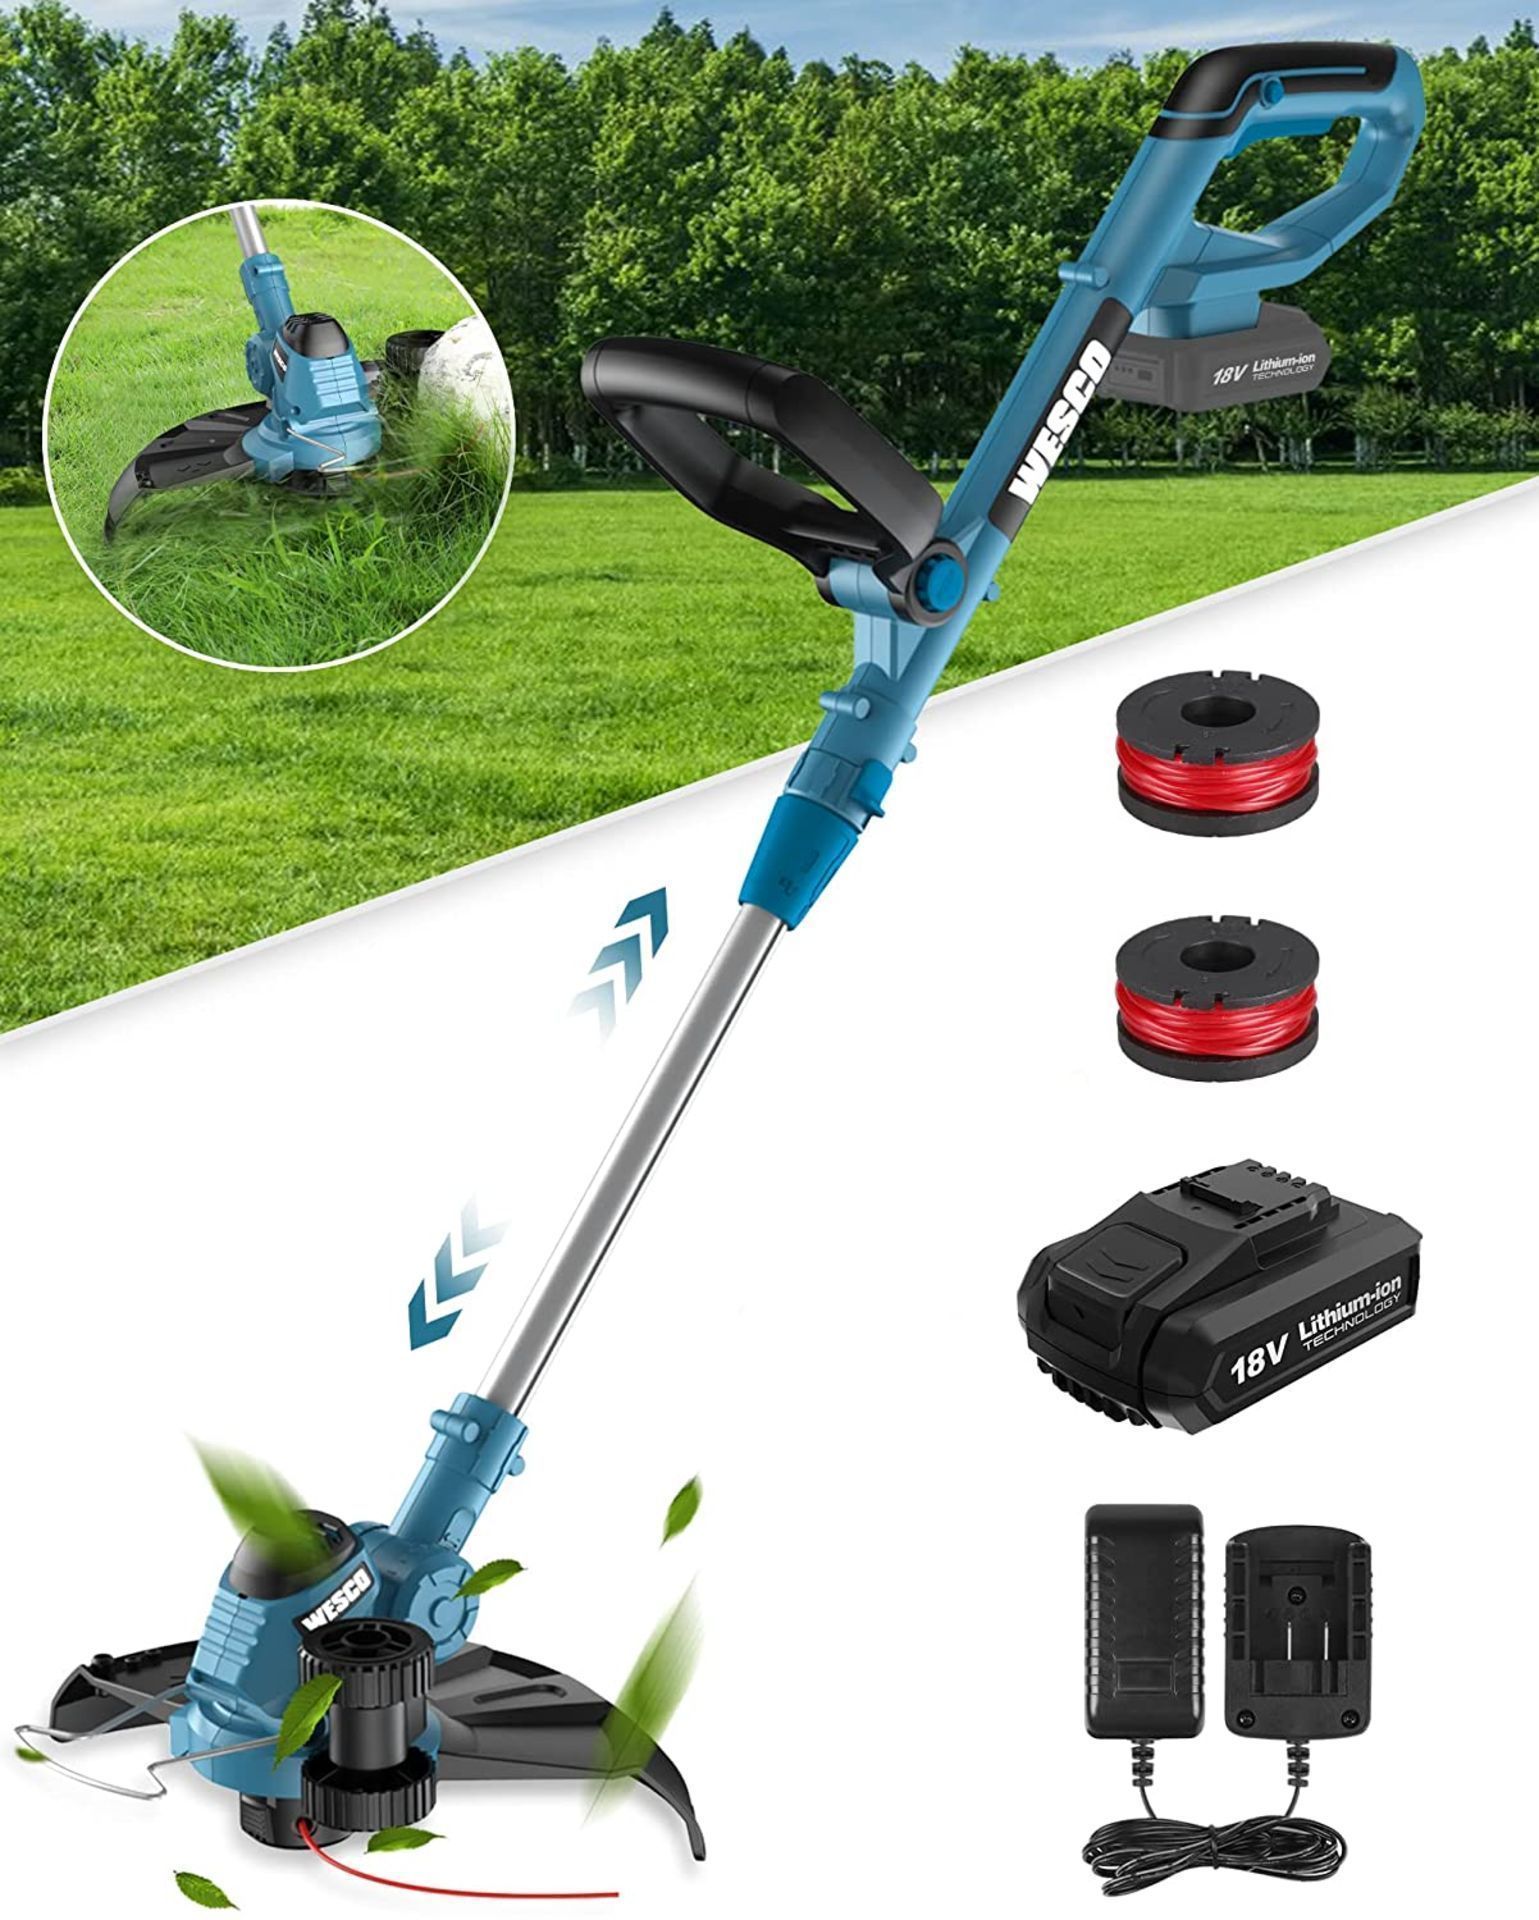 TRADE LOT 8 X BRAND NEW New Boxed WESCO Cordless 2 in 1 Electric String Trimmer/Edger 18V with 2.0Ah